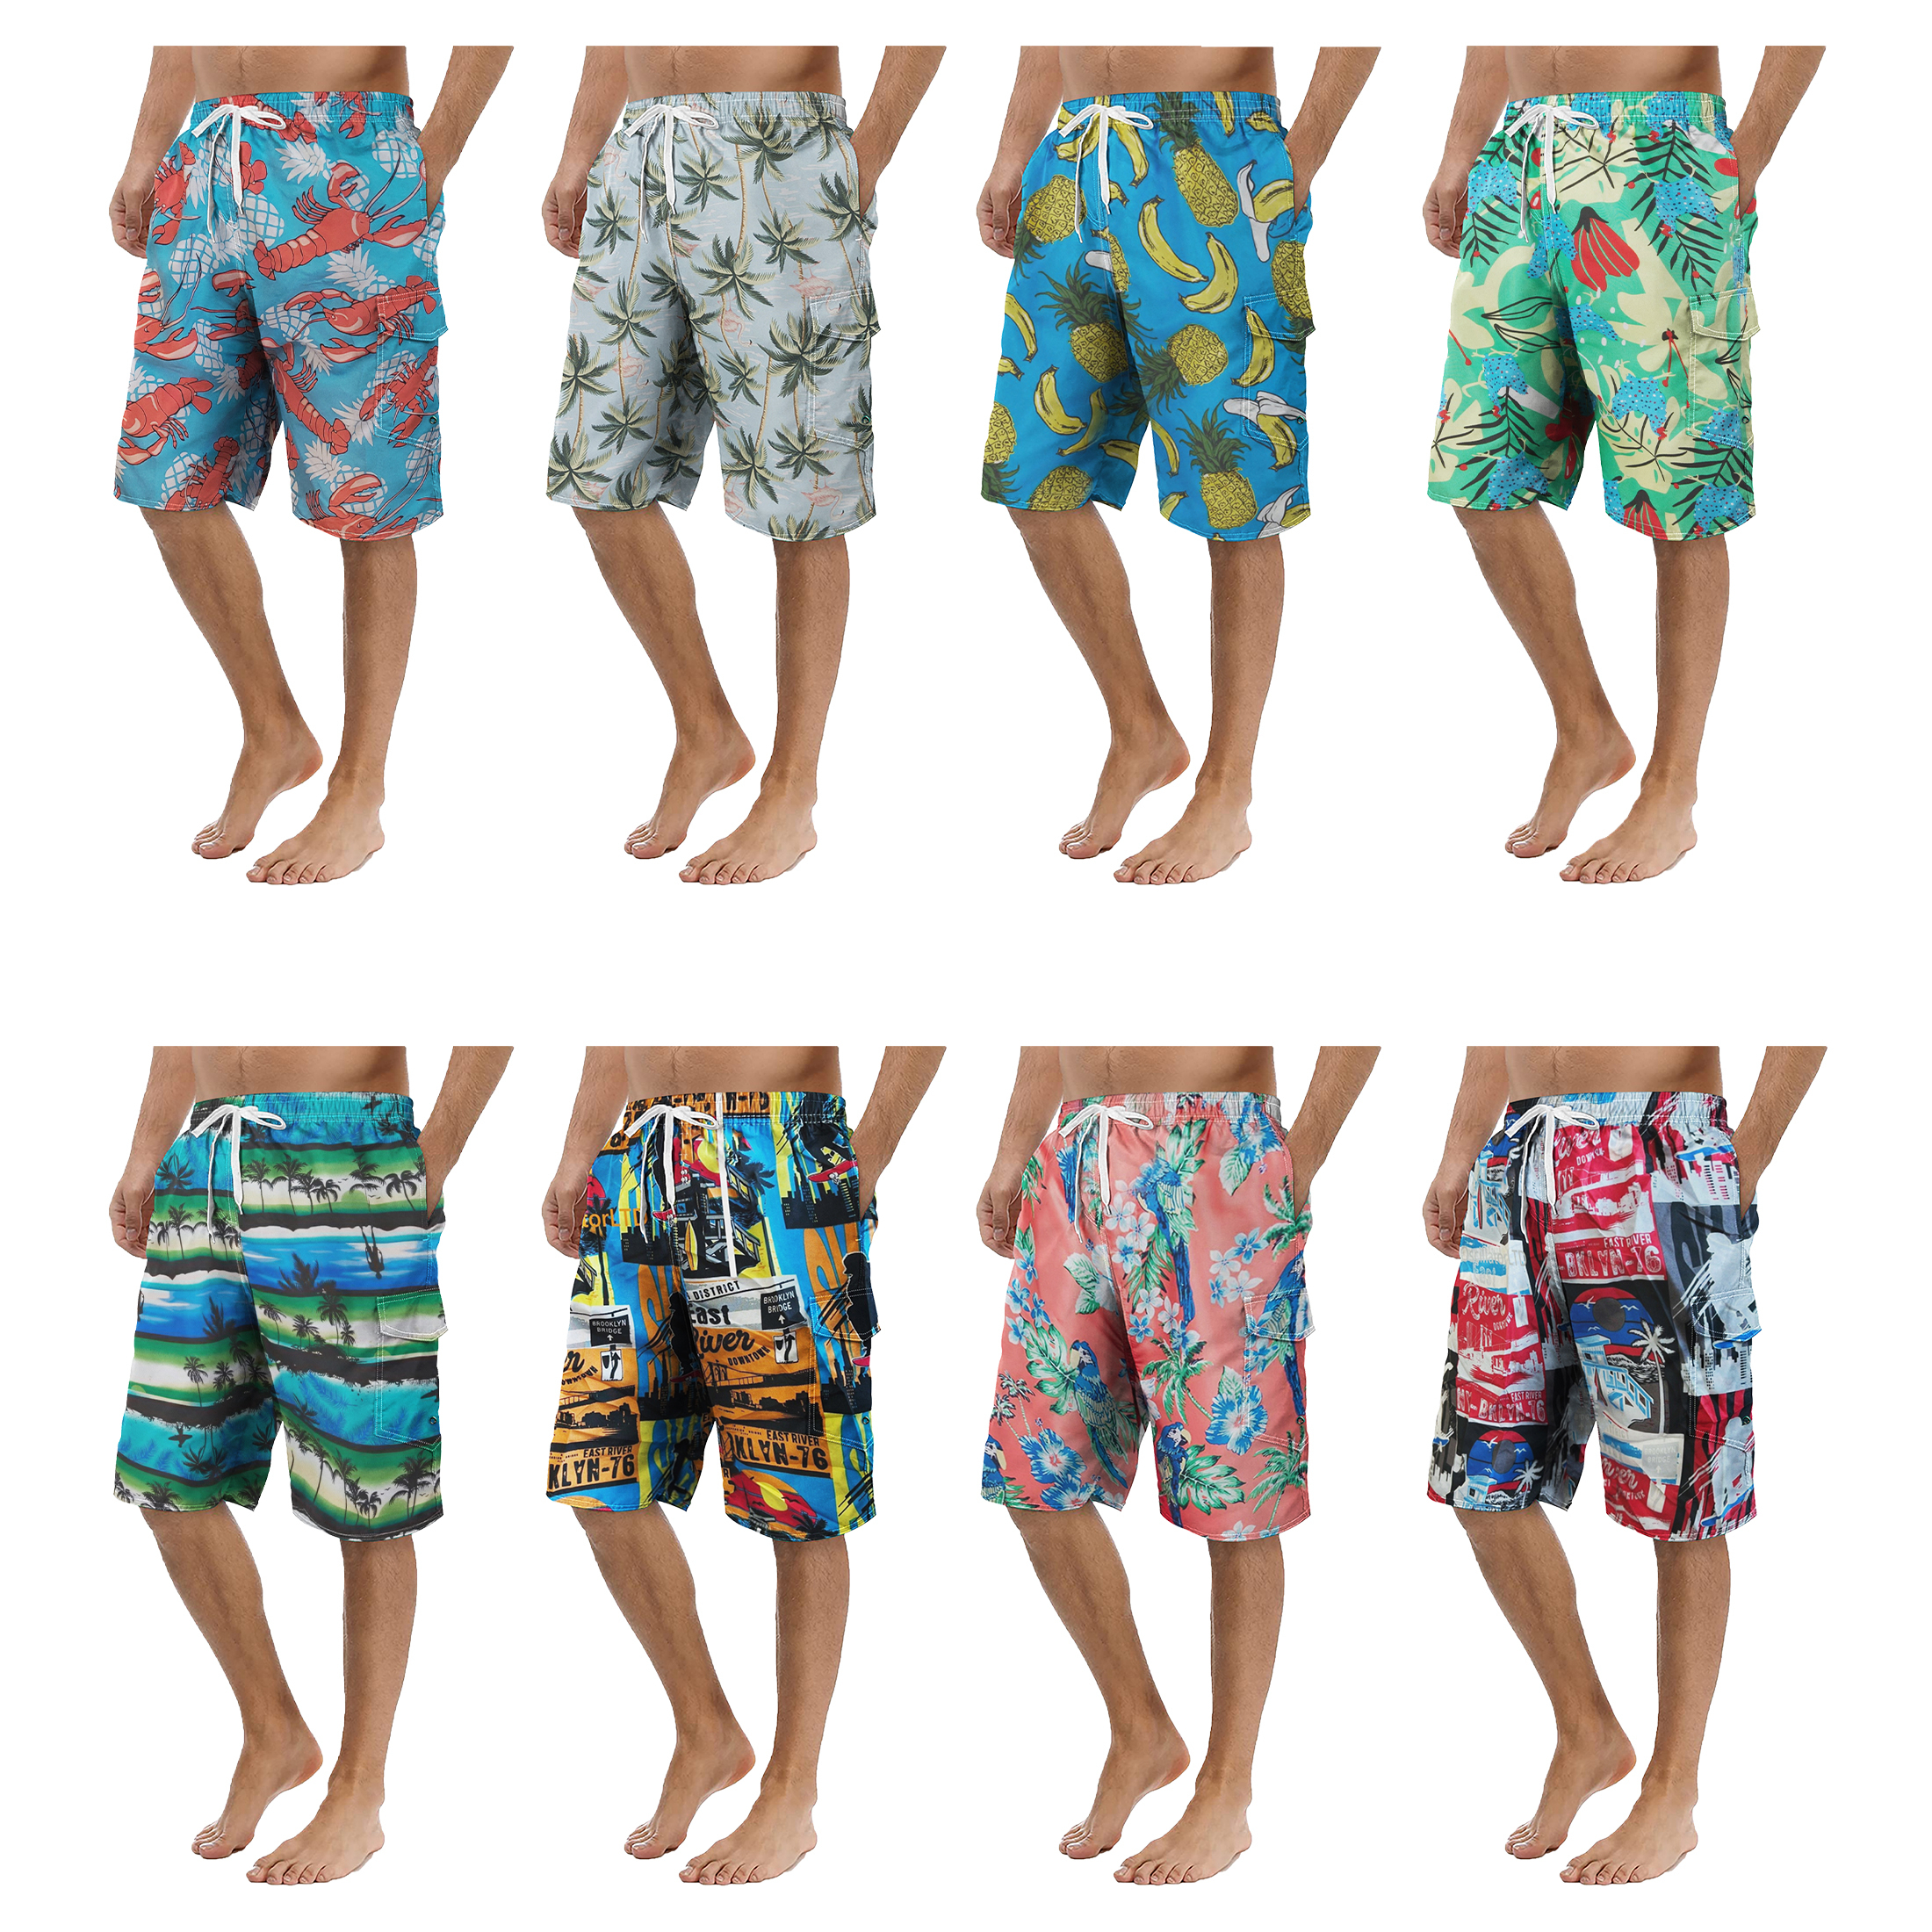 2-Pack Men's Quick Dry Printed Cargo Swim Shorts With Pockets Regular Flex Bathing Board Suits & Trunks - S